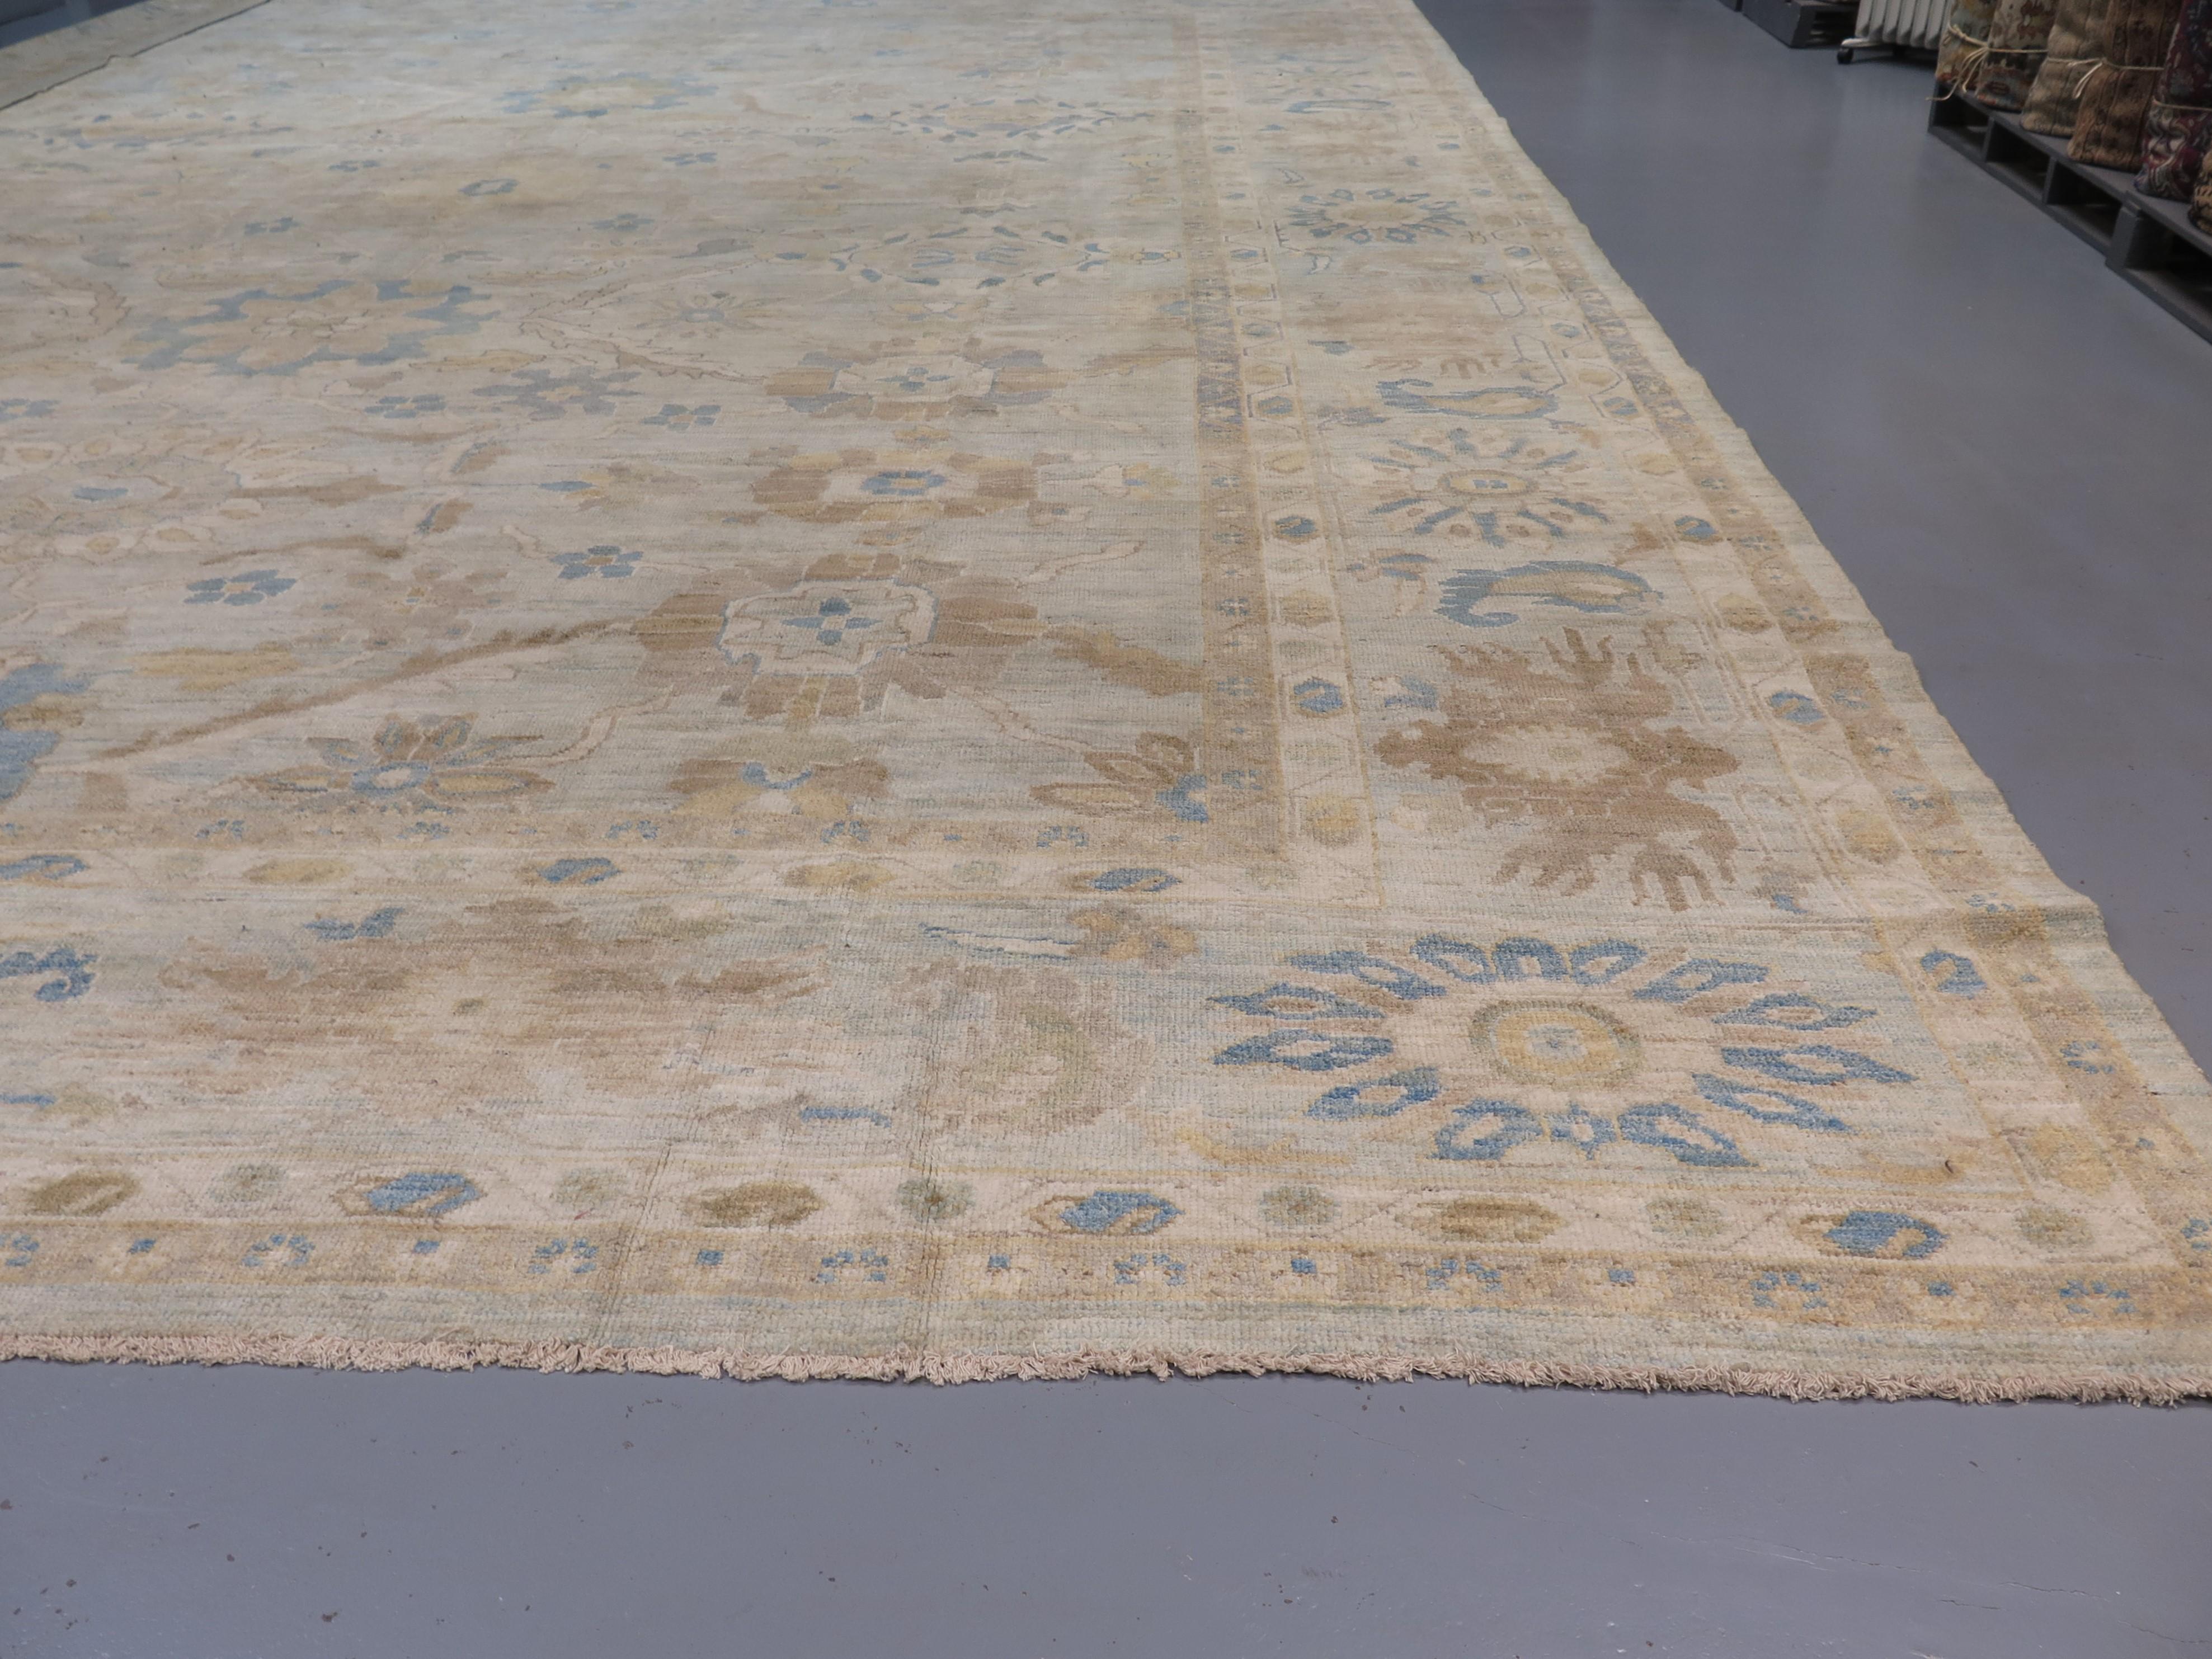 Ziegler Sultanabad carpets were originally commissioned in Persia for the Western market during the late 19th Century, to complement Western furnishing tastes, quickly becoming popular across the UK and Europe, thanks to their unique, grand scale